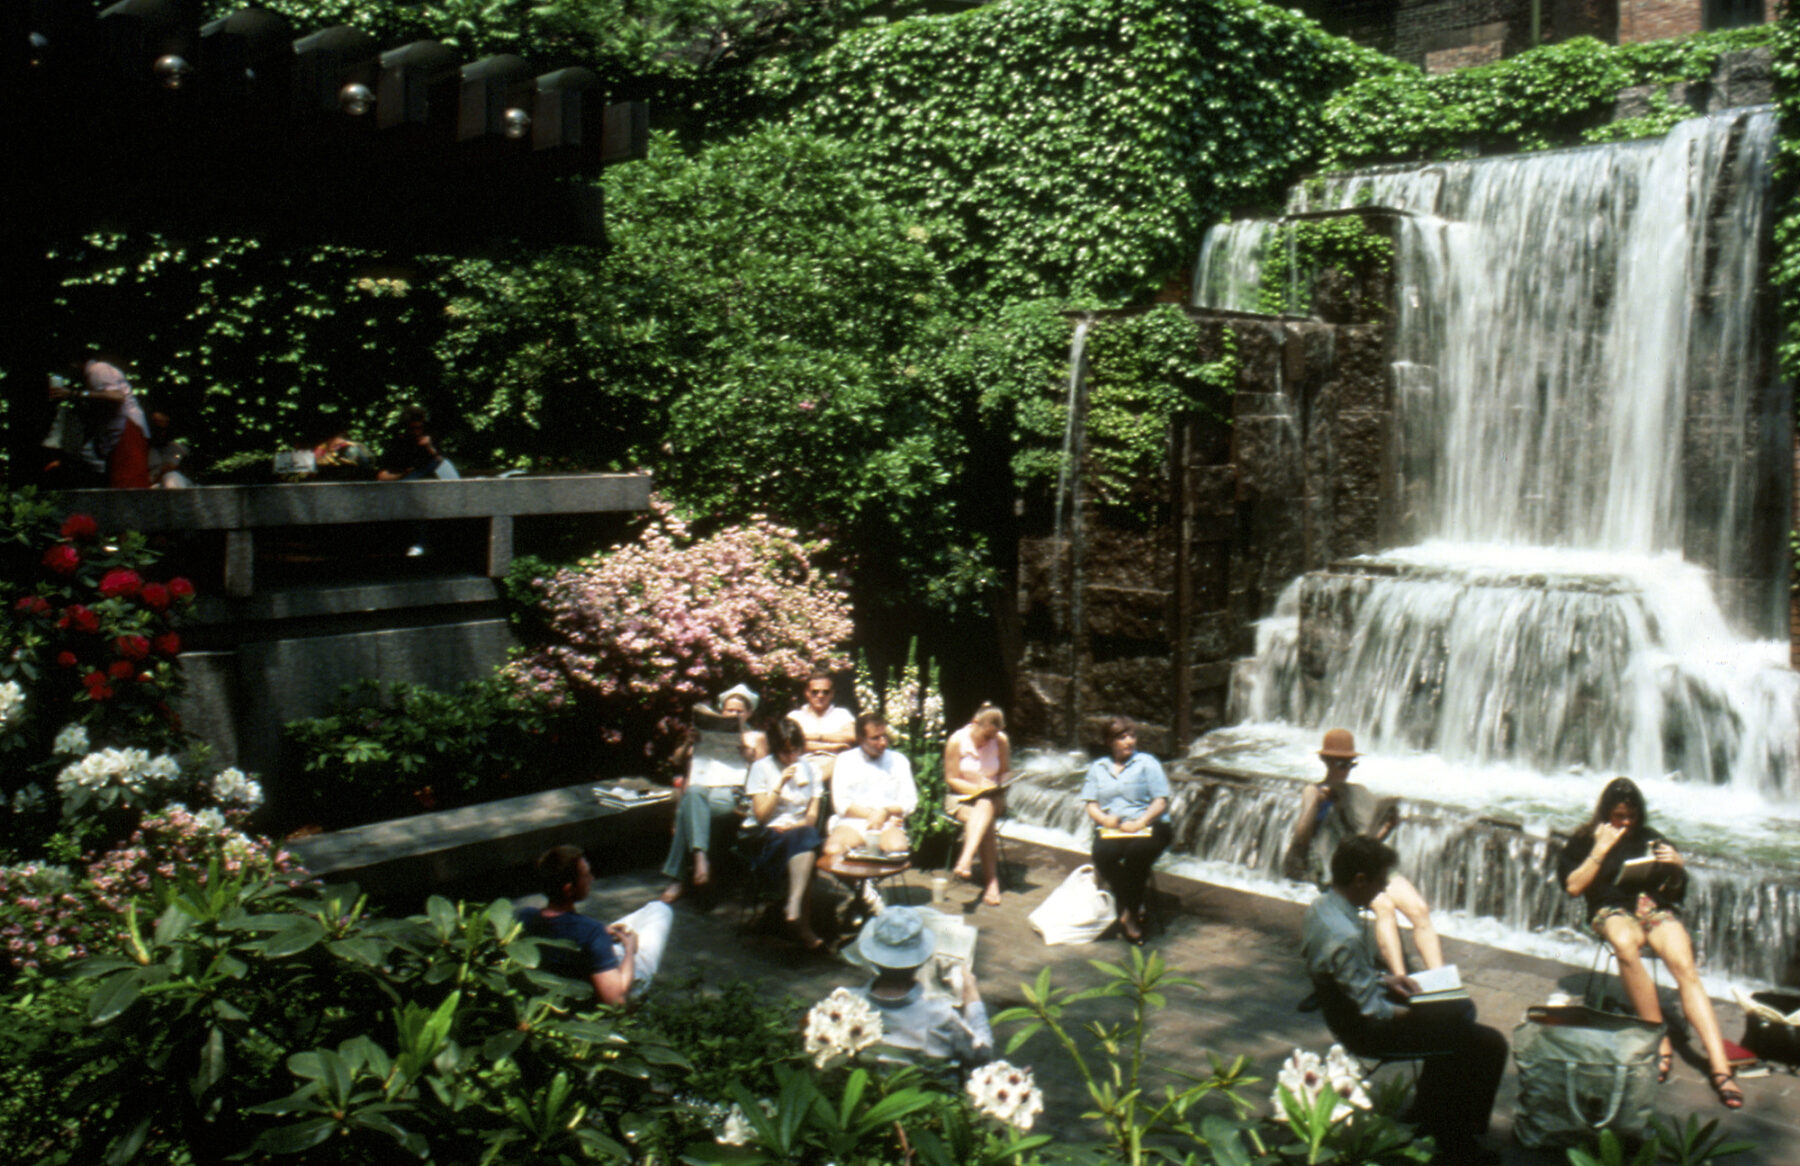 Aged photo of park with visitors enjoying seating beside the waterfall